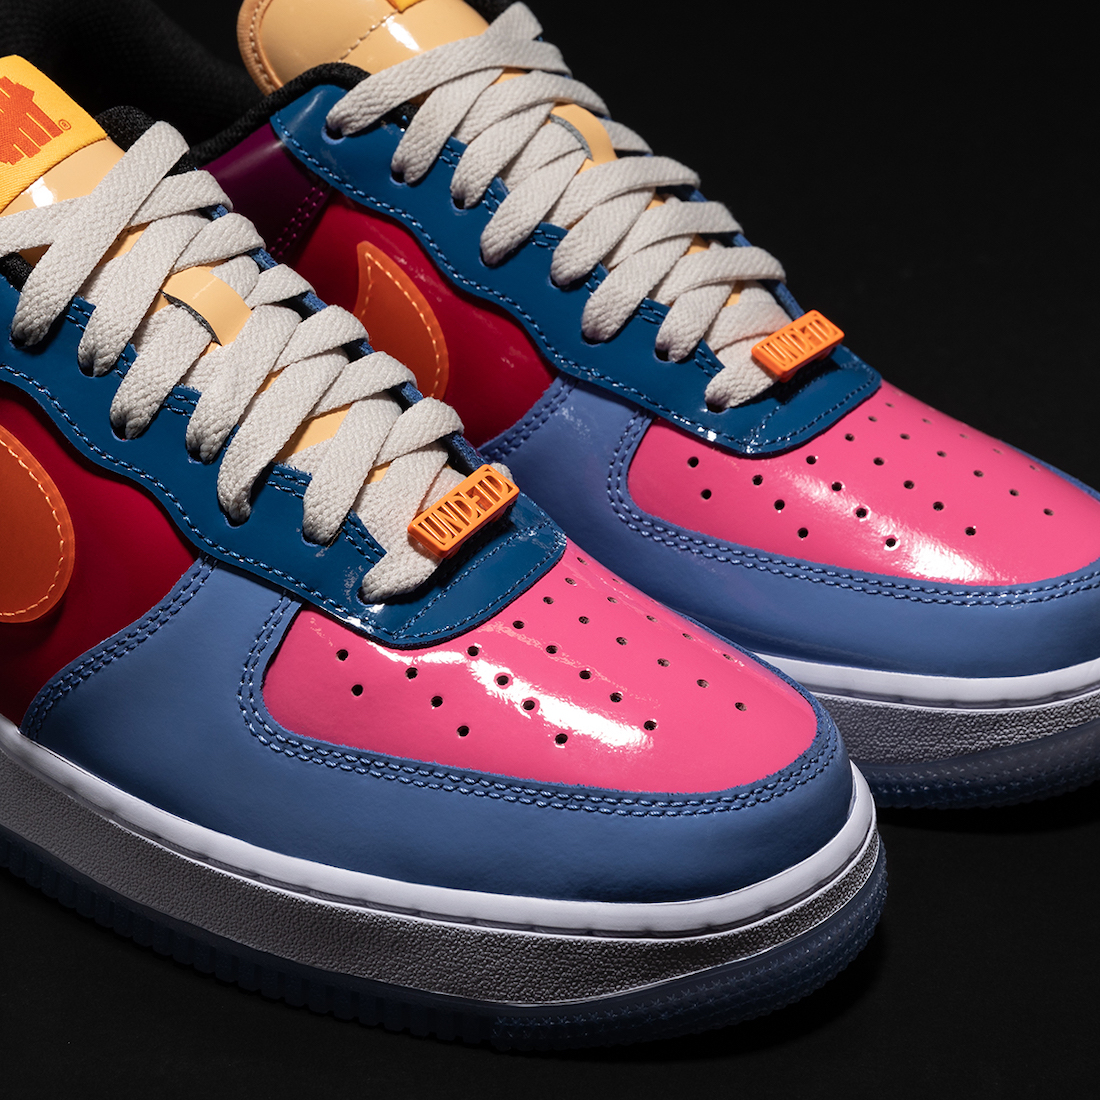 Undefeated Nike Air Force 1 Patent Total Orange DV5255-400 Release Date Toe